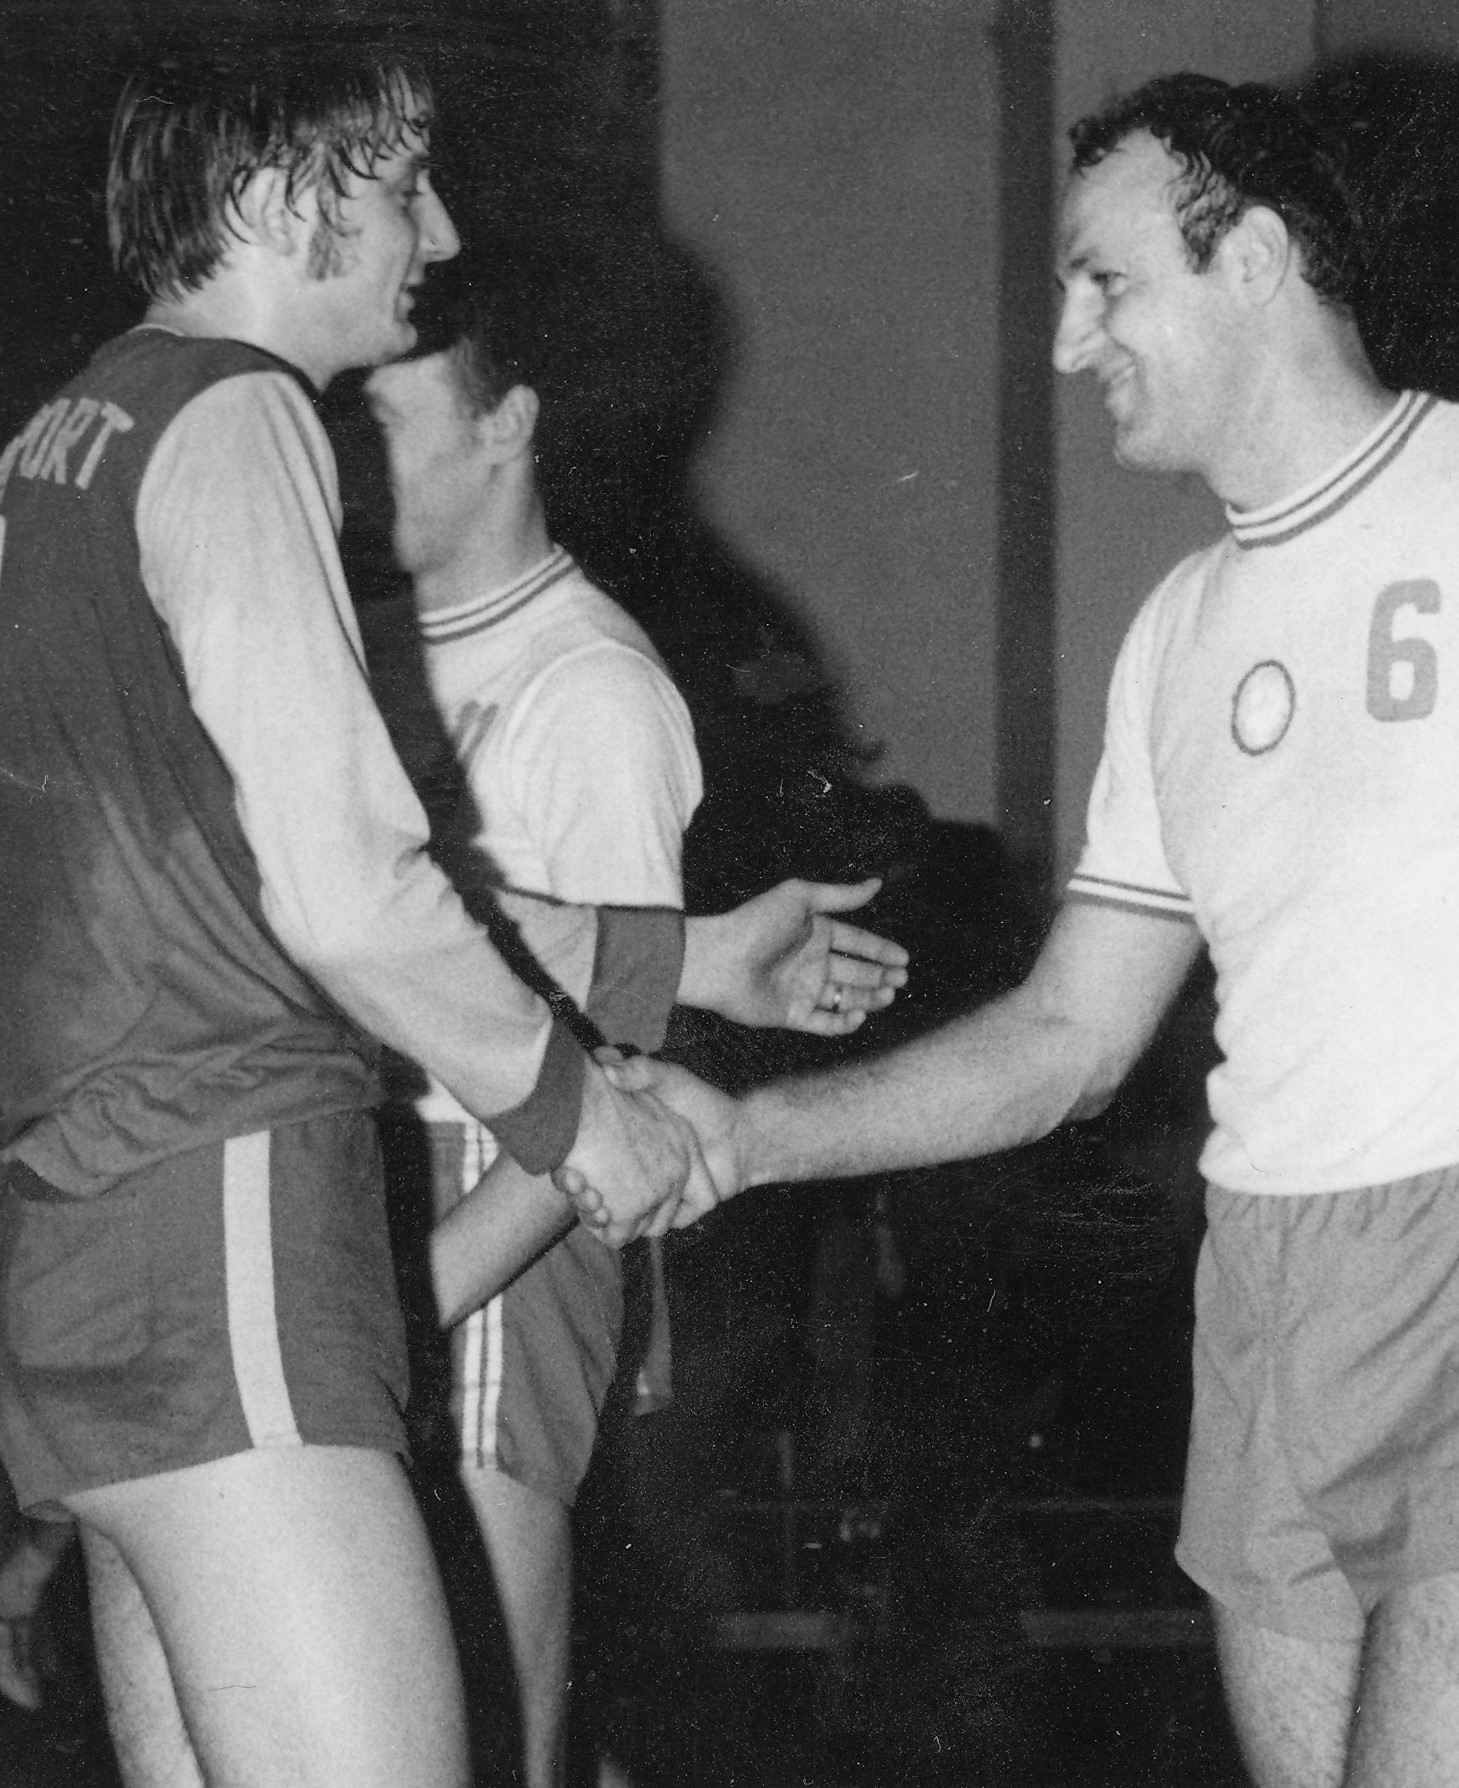 Vlastimír Lenert after a European Champions Cup match in the 1970s. Dukla Liberec played with Bulgaria's CSKA Sofia